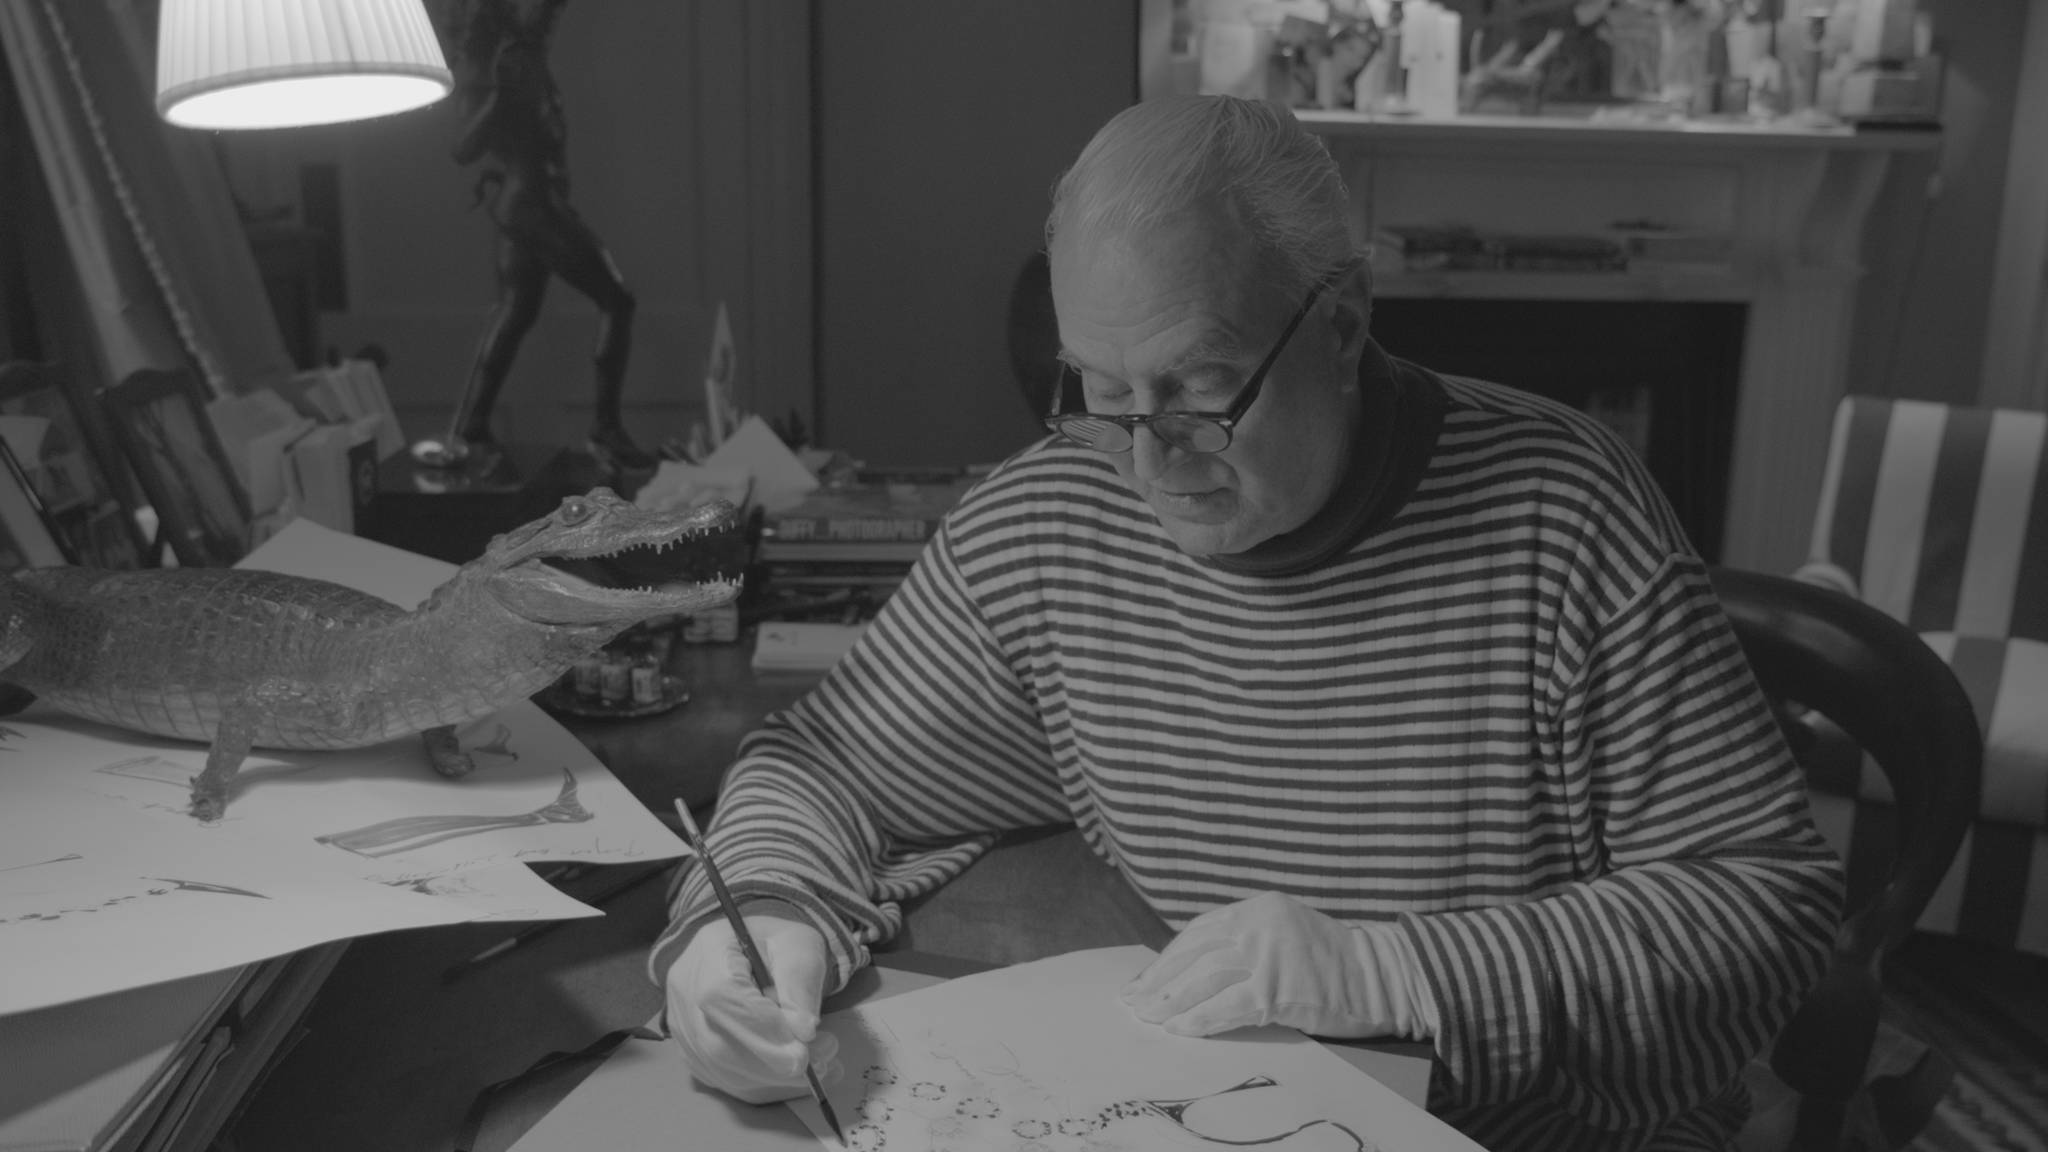 A black and white image of Manolo sketching a shoe. He is wearing a Breton turtle neck and white gloves.